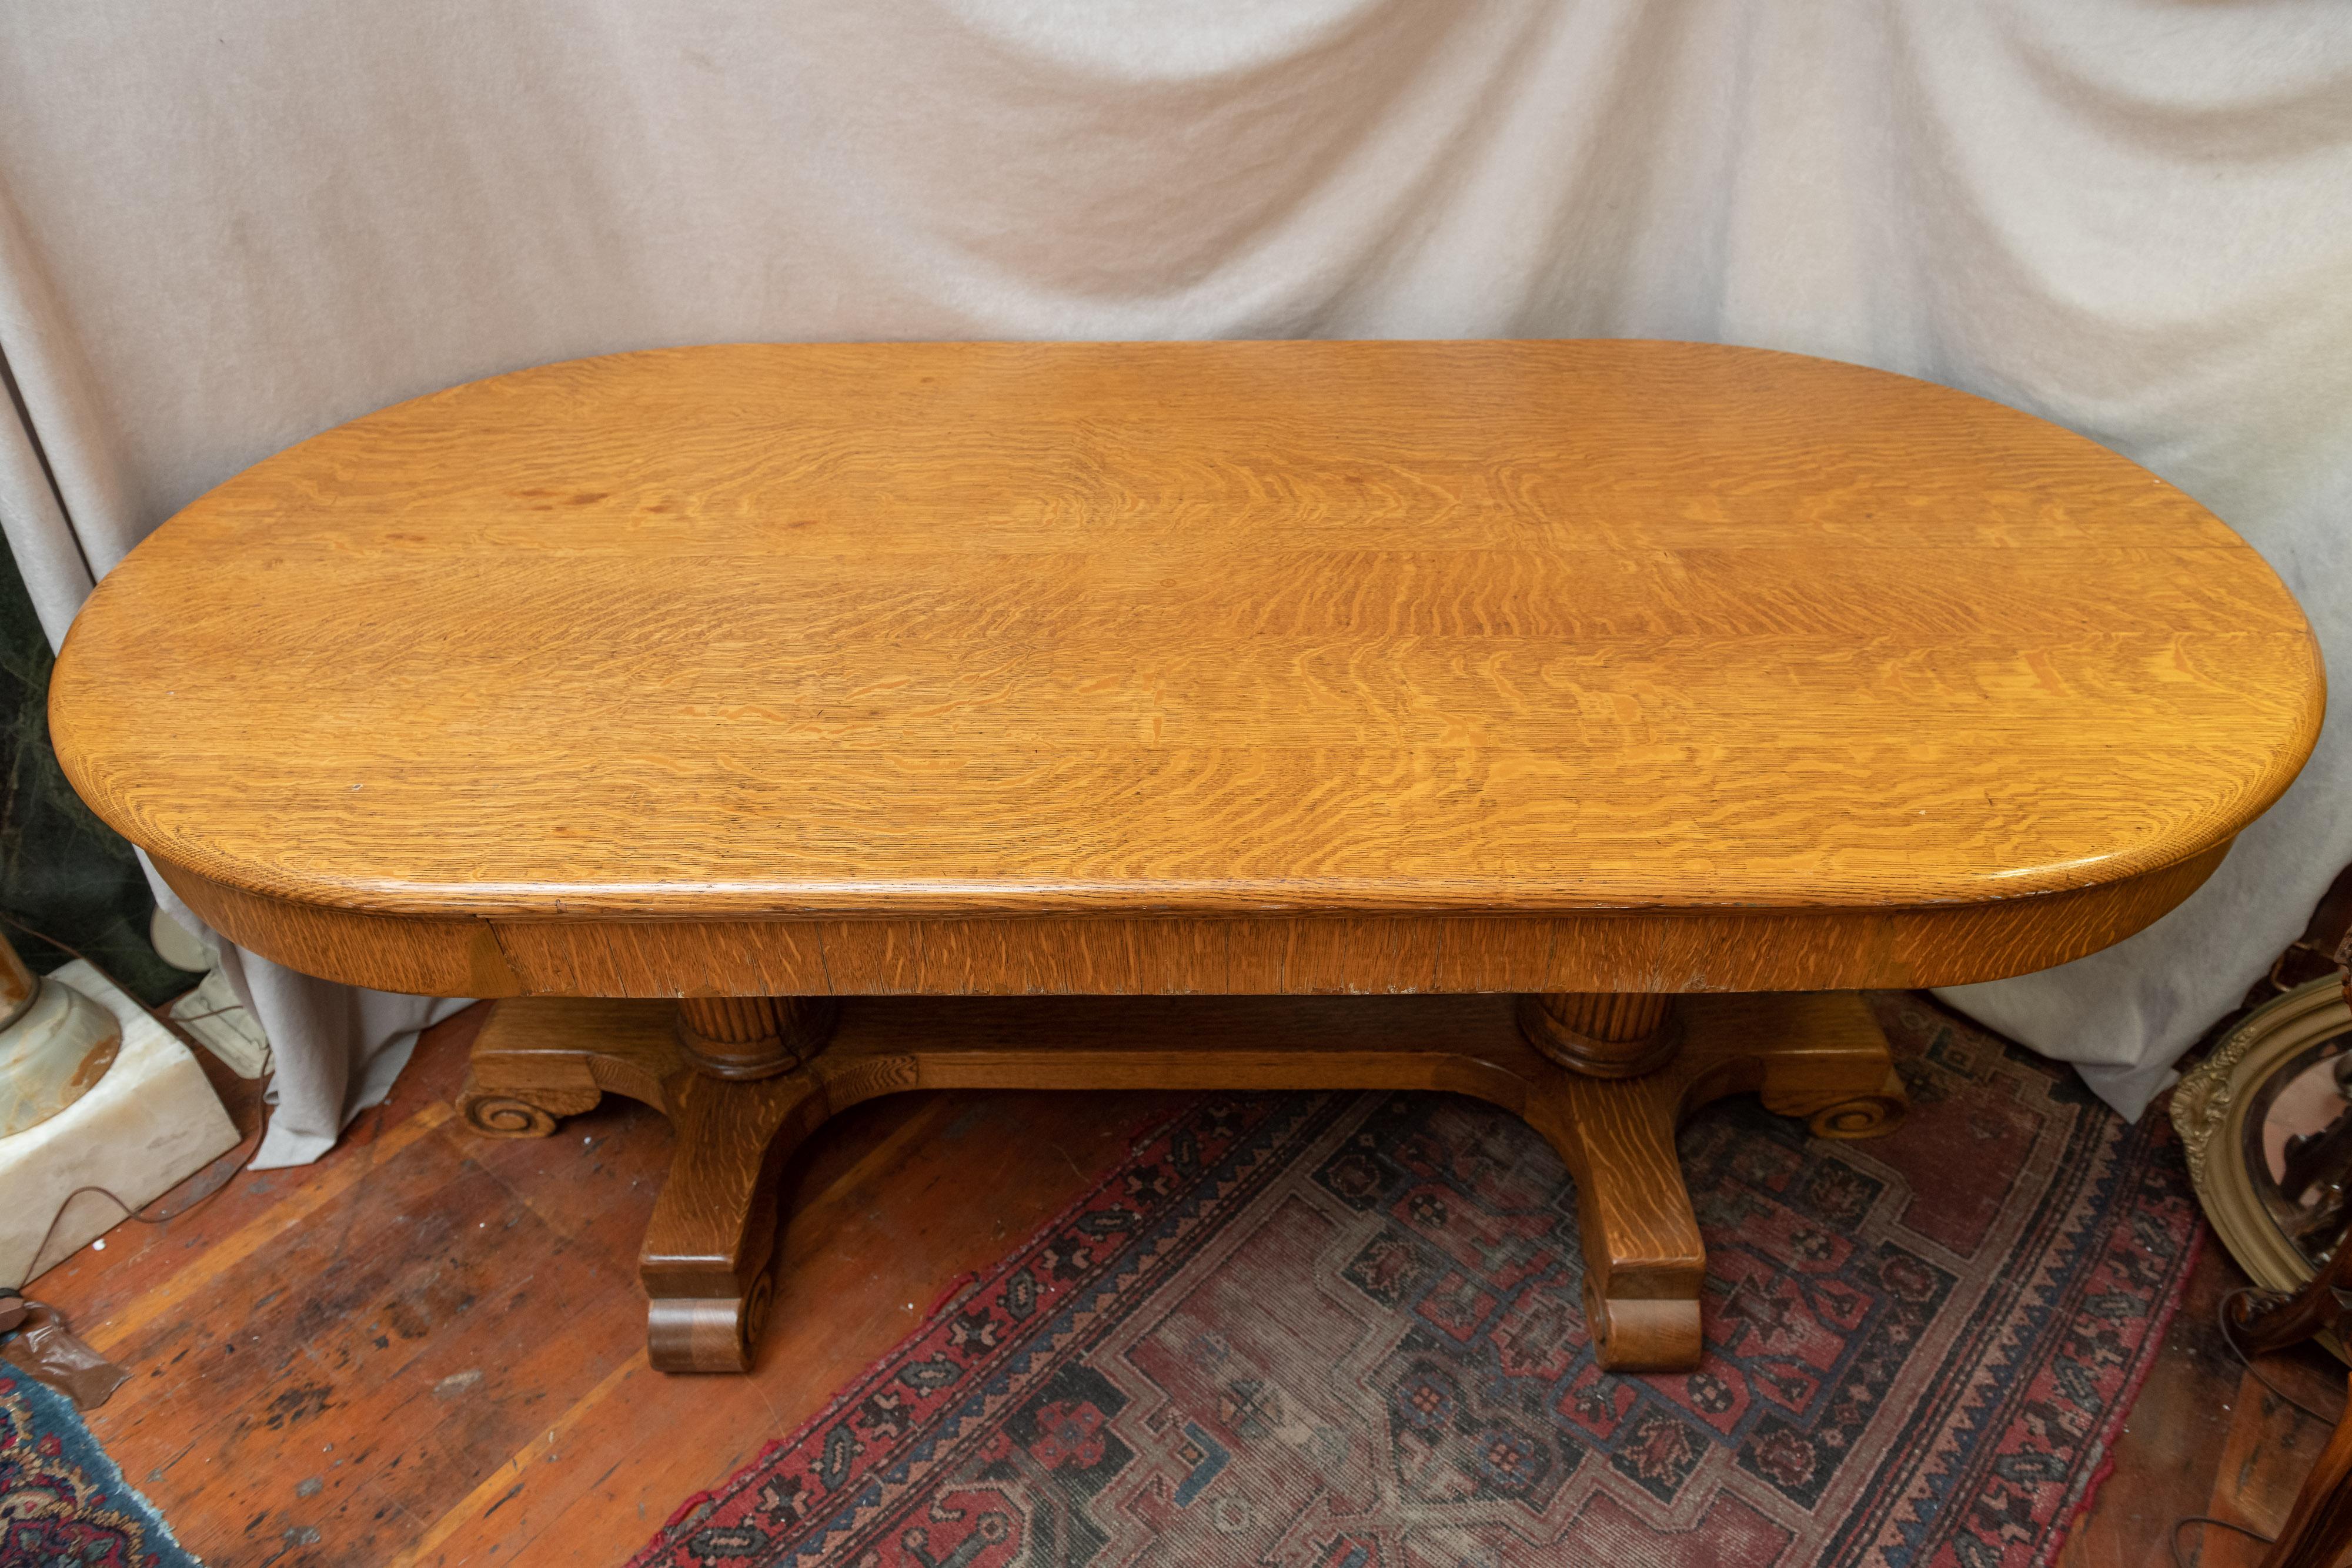 American Craftsman Large Oval Quarter Sawn Oak Conference Table/ Dining Room Table, circa 1900